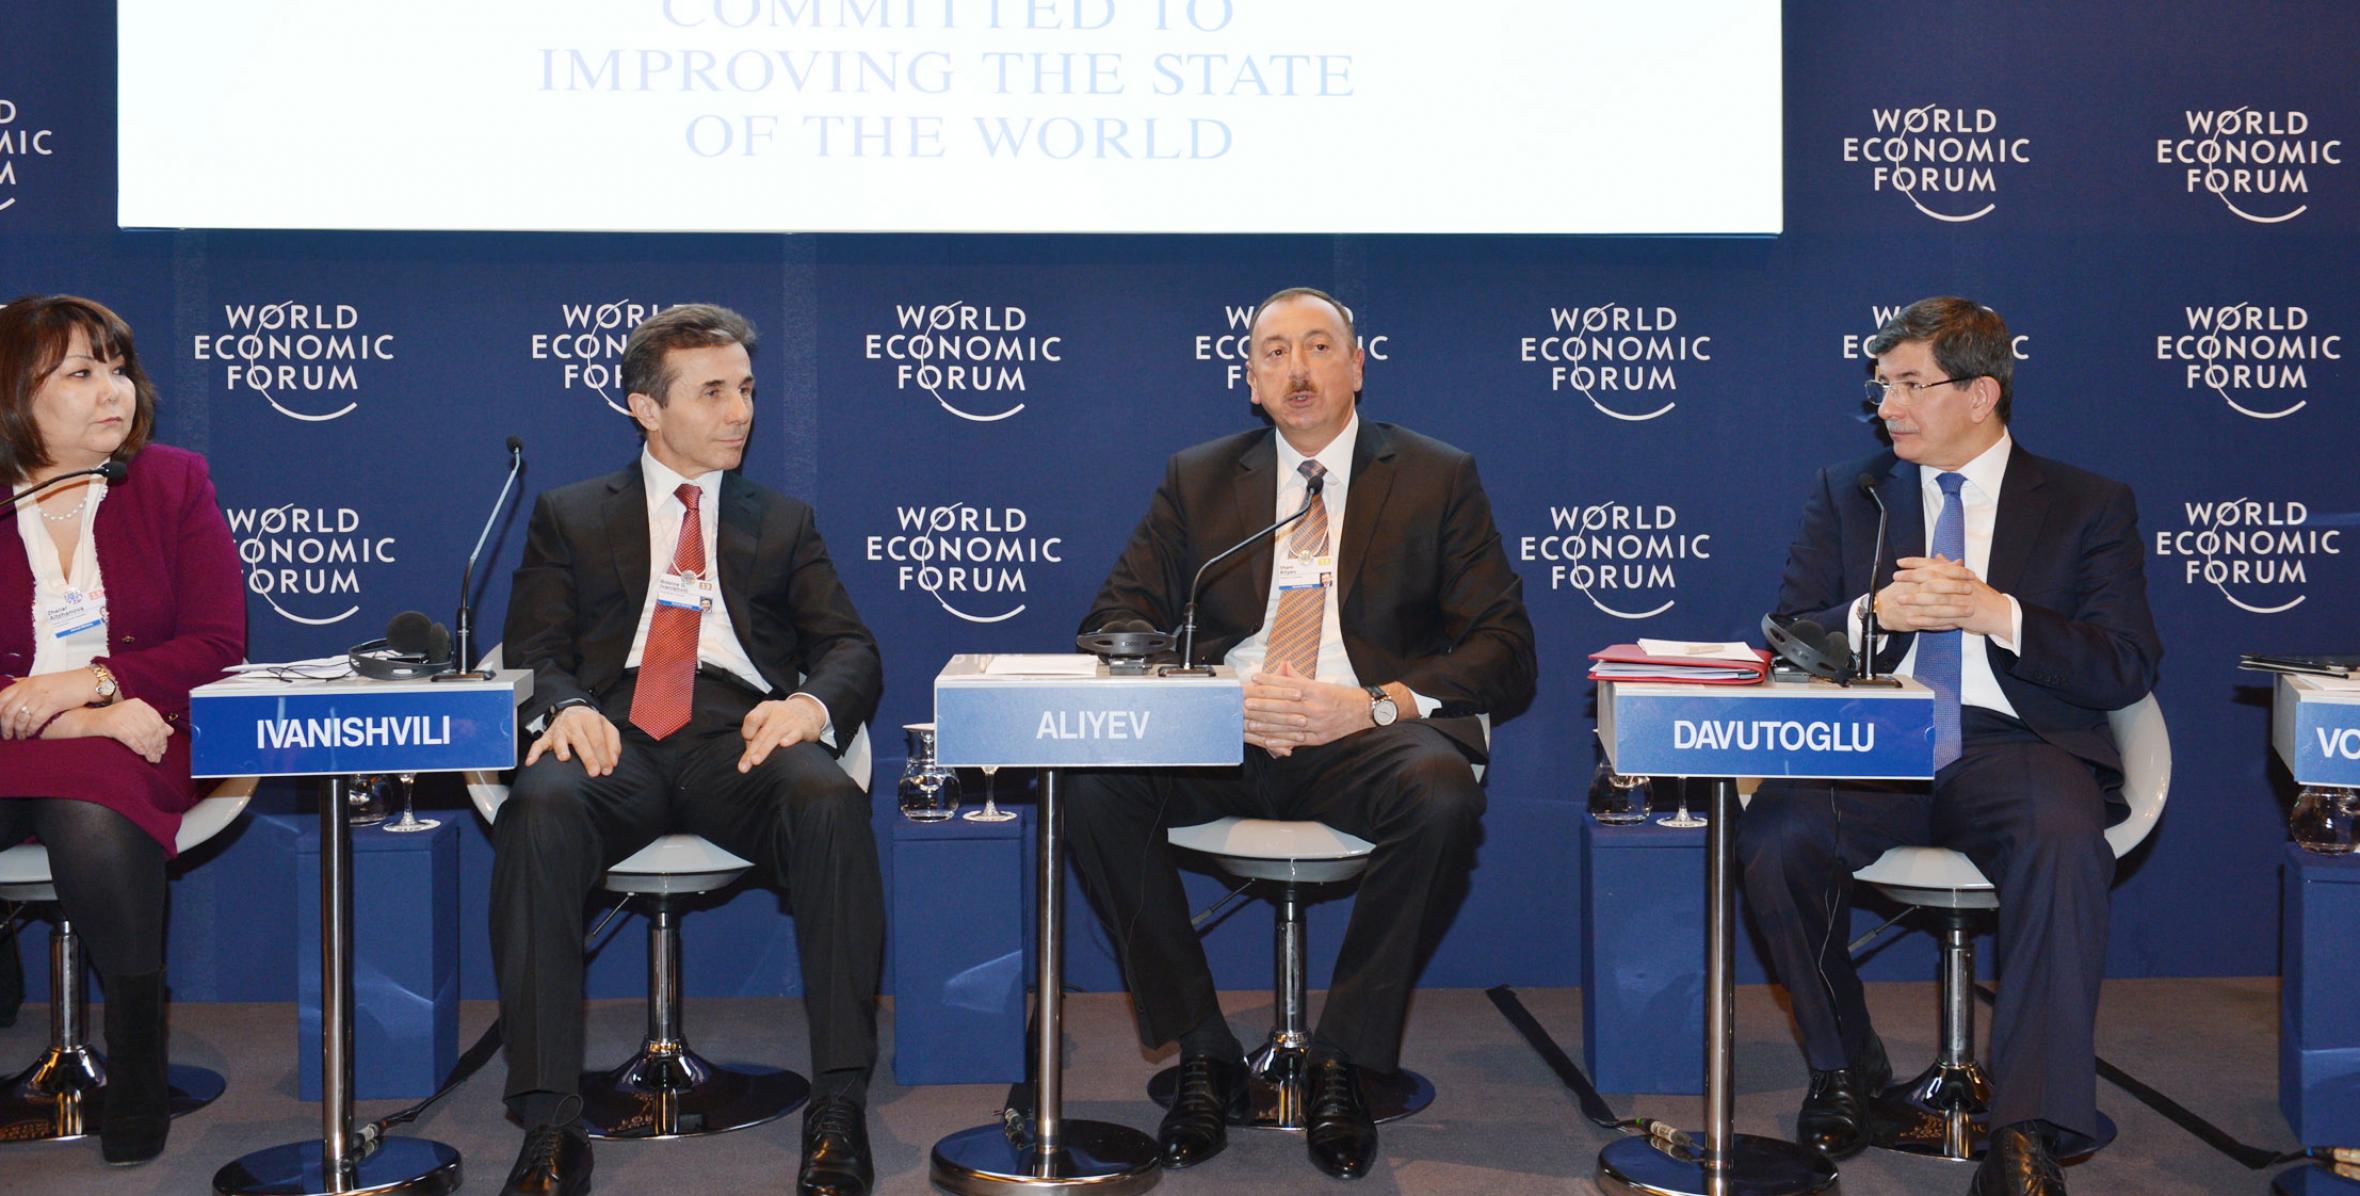 Ilham Aliyev attended the “New Dawn for Central Asia” session of the World Economic Forum in Davos